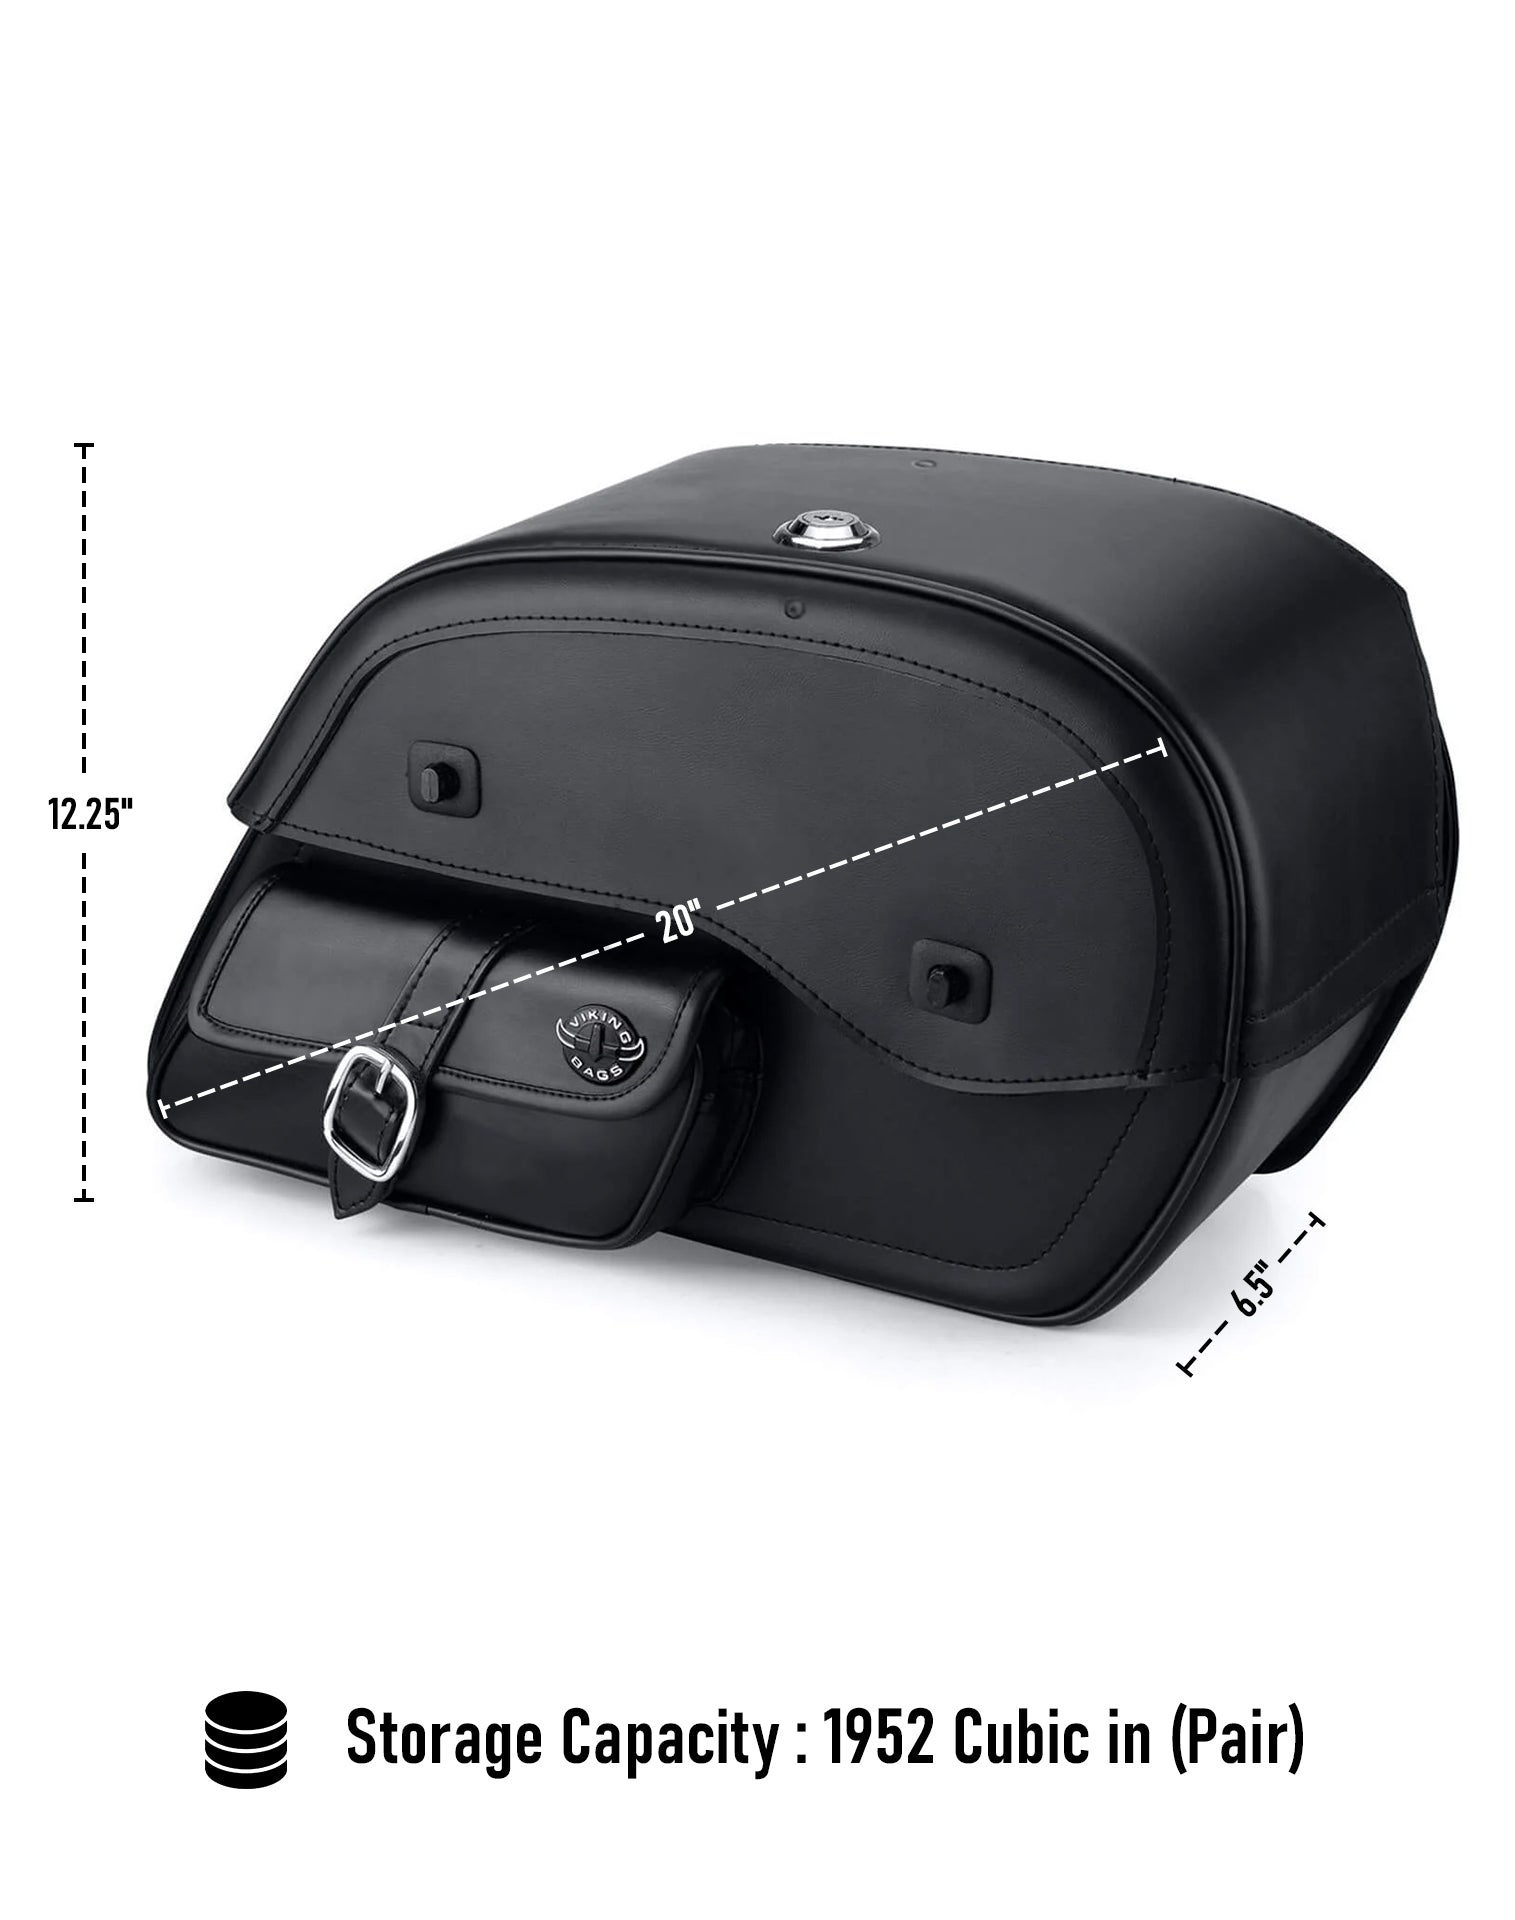 Viking Essential Side Pocket Large Kawasaki Vulcan 800 Classic Leather Motorcycle Saddlebags Can Store Your Ridings Gears